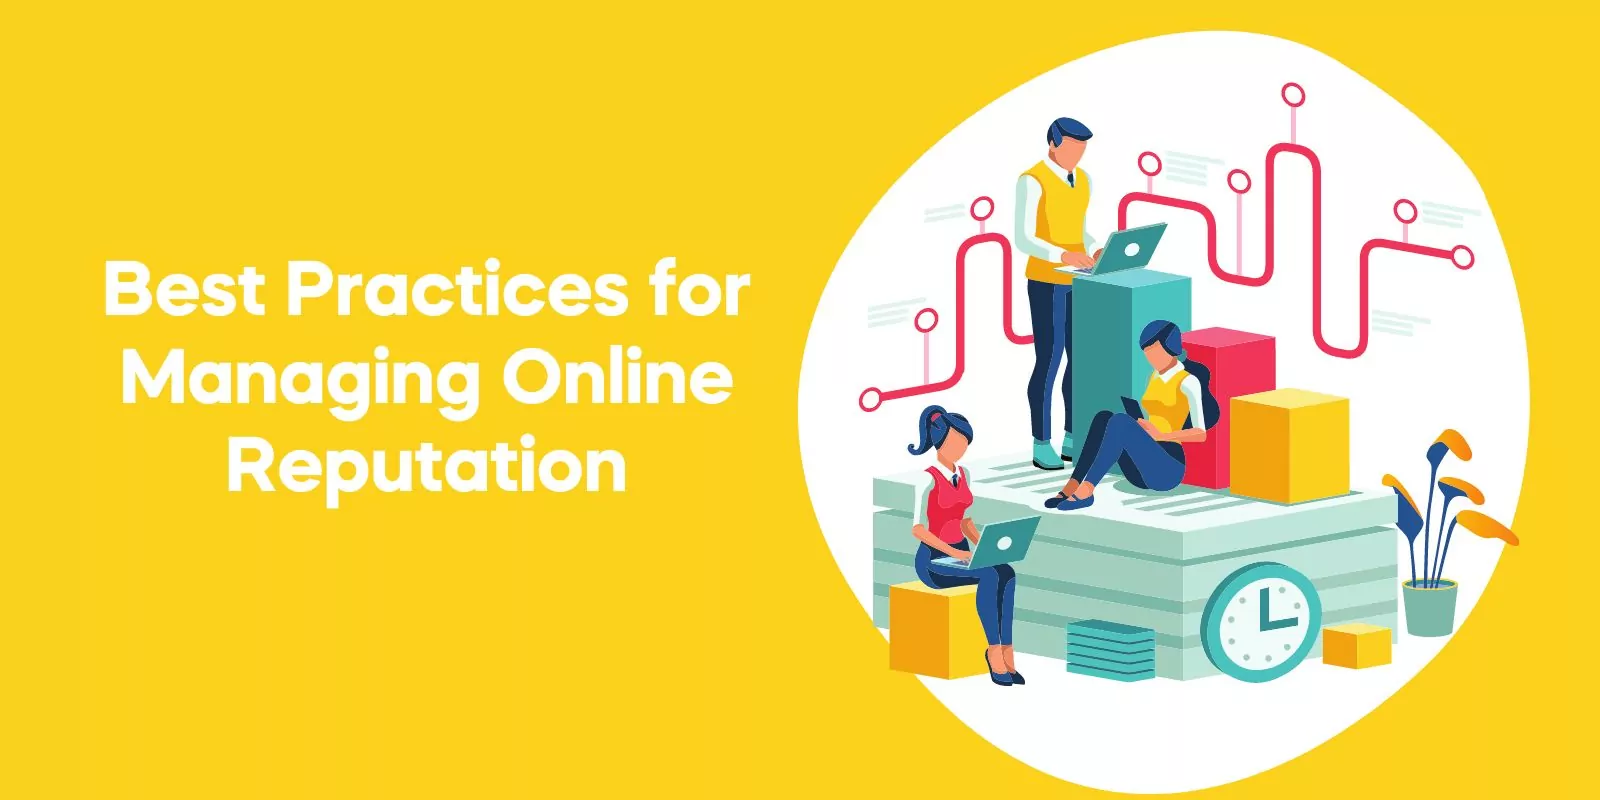 Best Practices for Managing Online Reputation